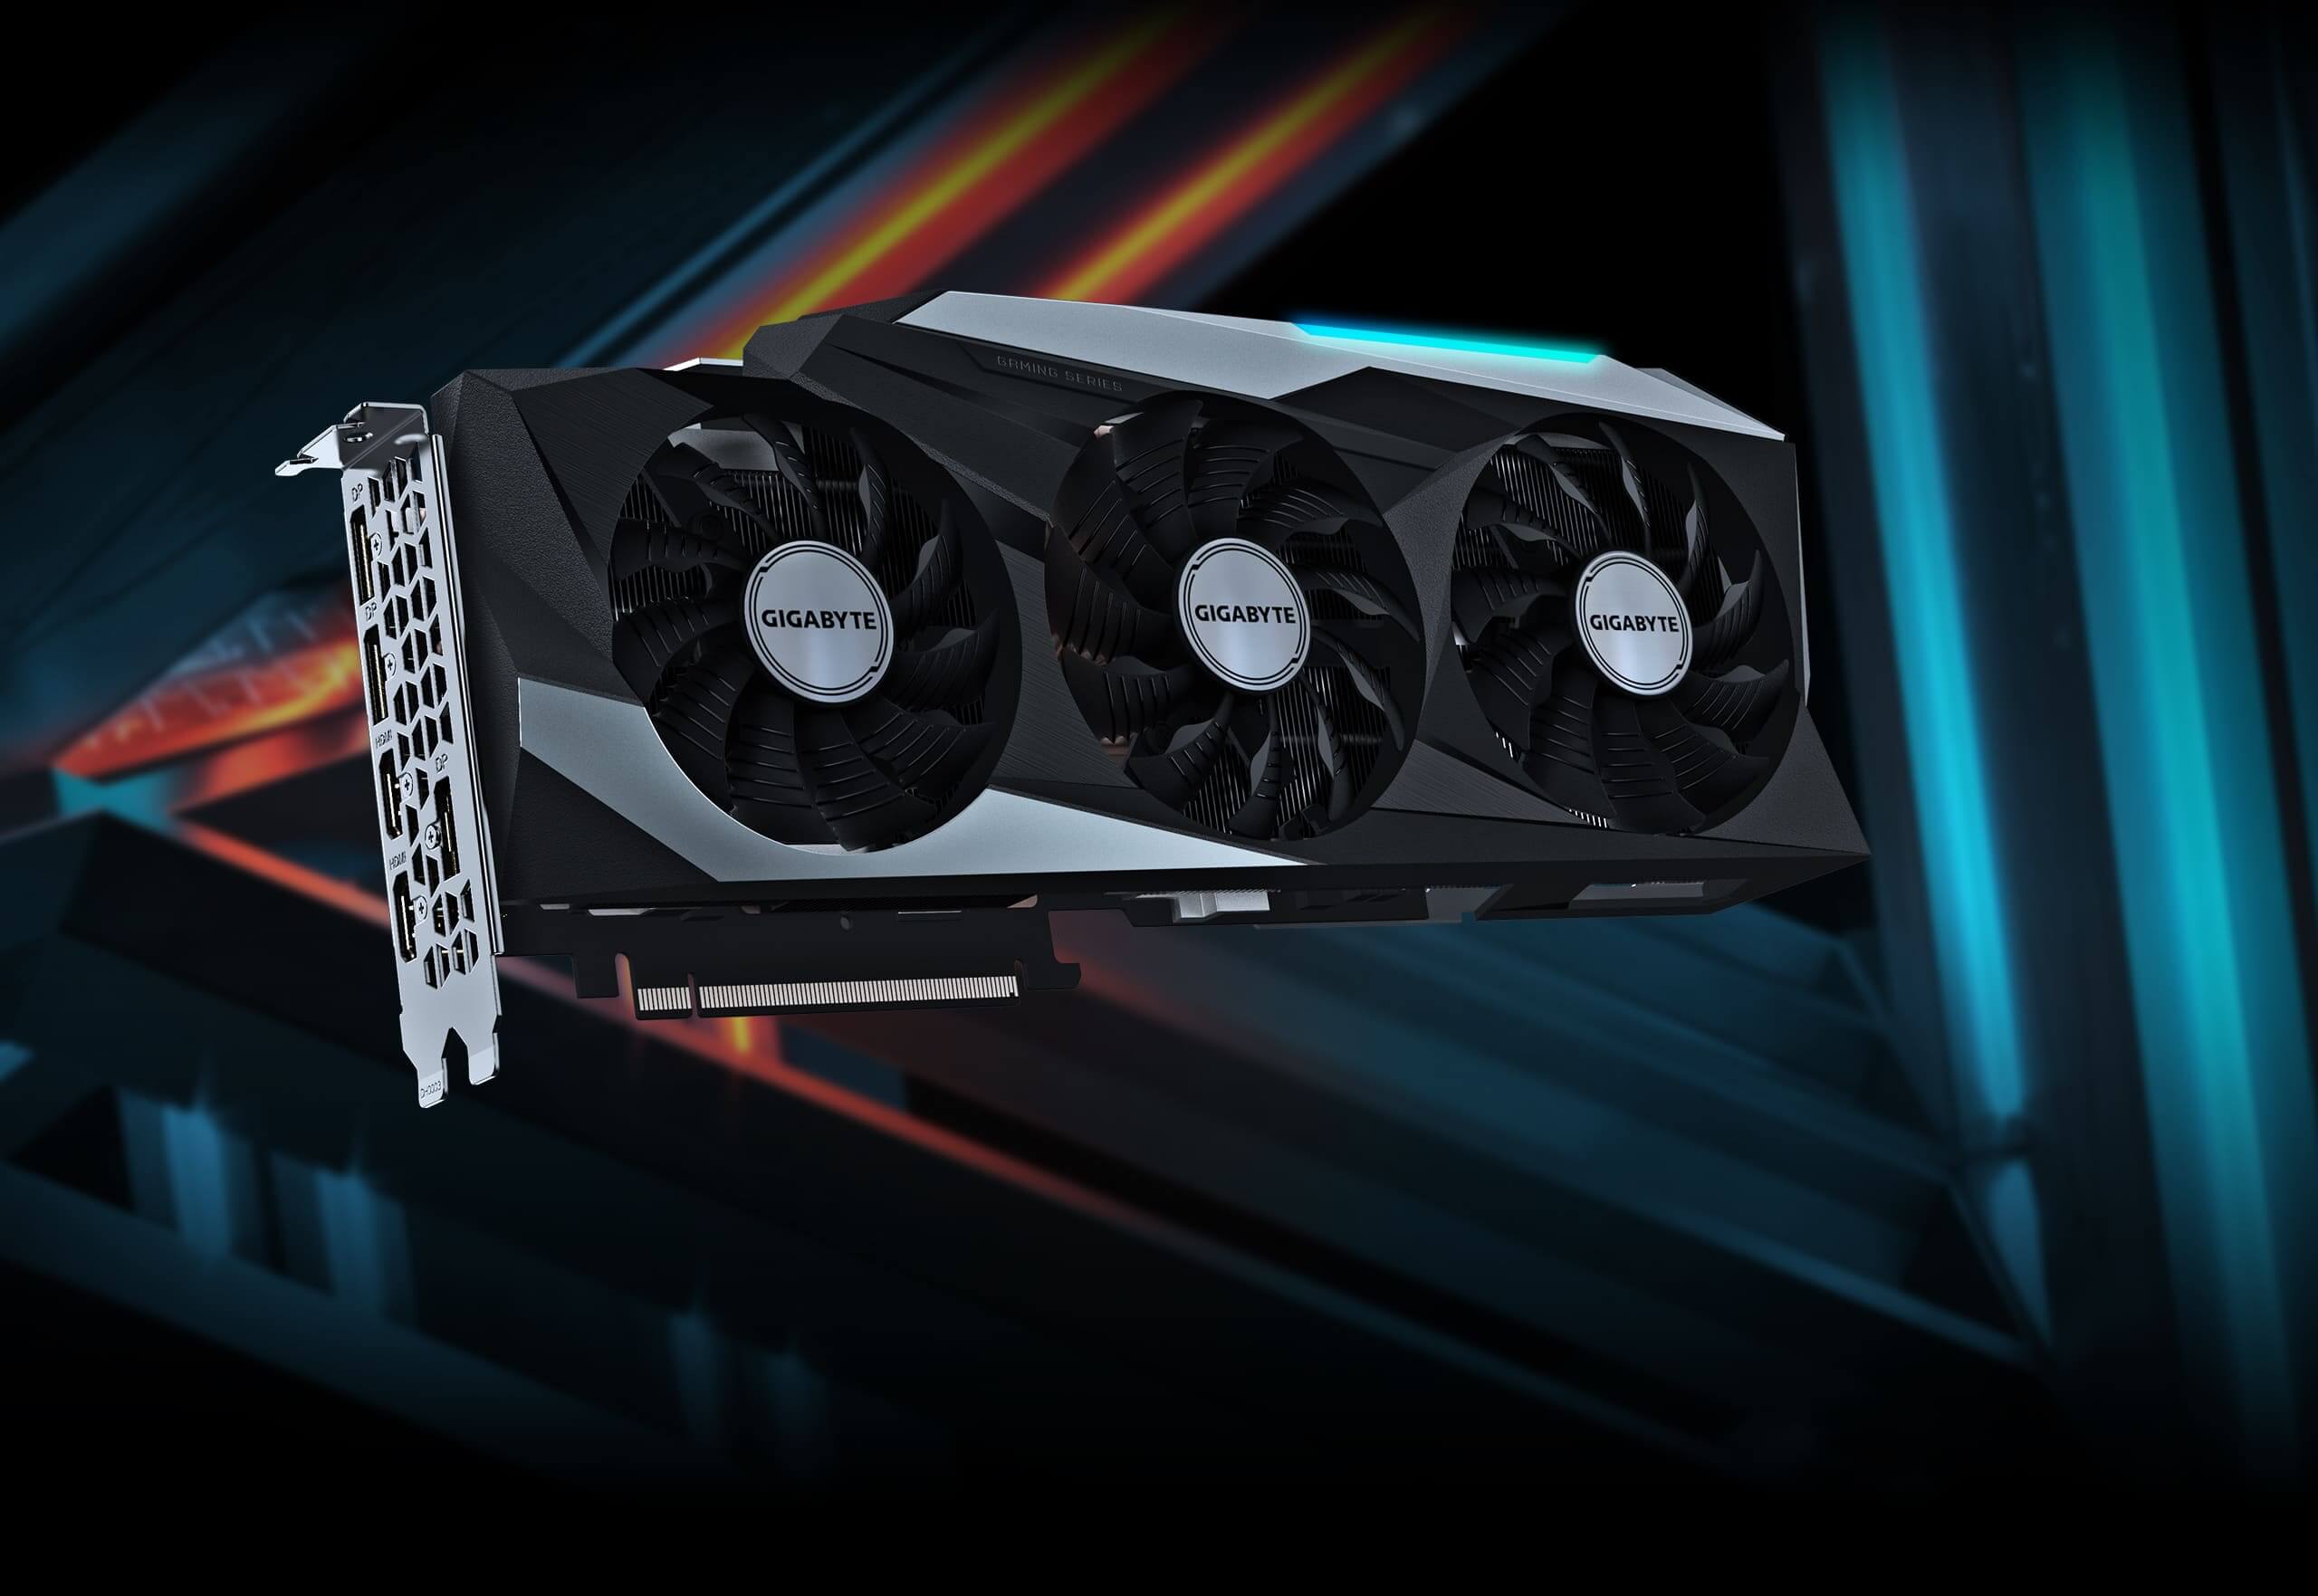 GeForce RTX™ 3080 GAMING OC 10G (rev. 2.0) Key Features | Graphics